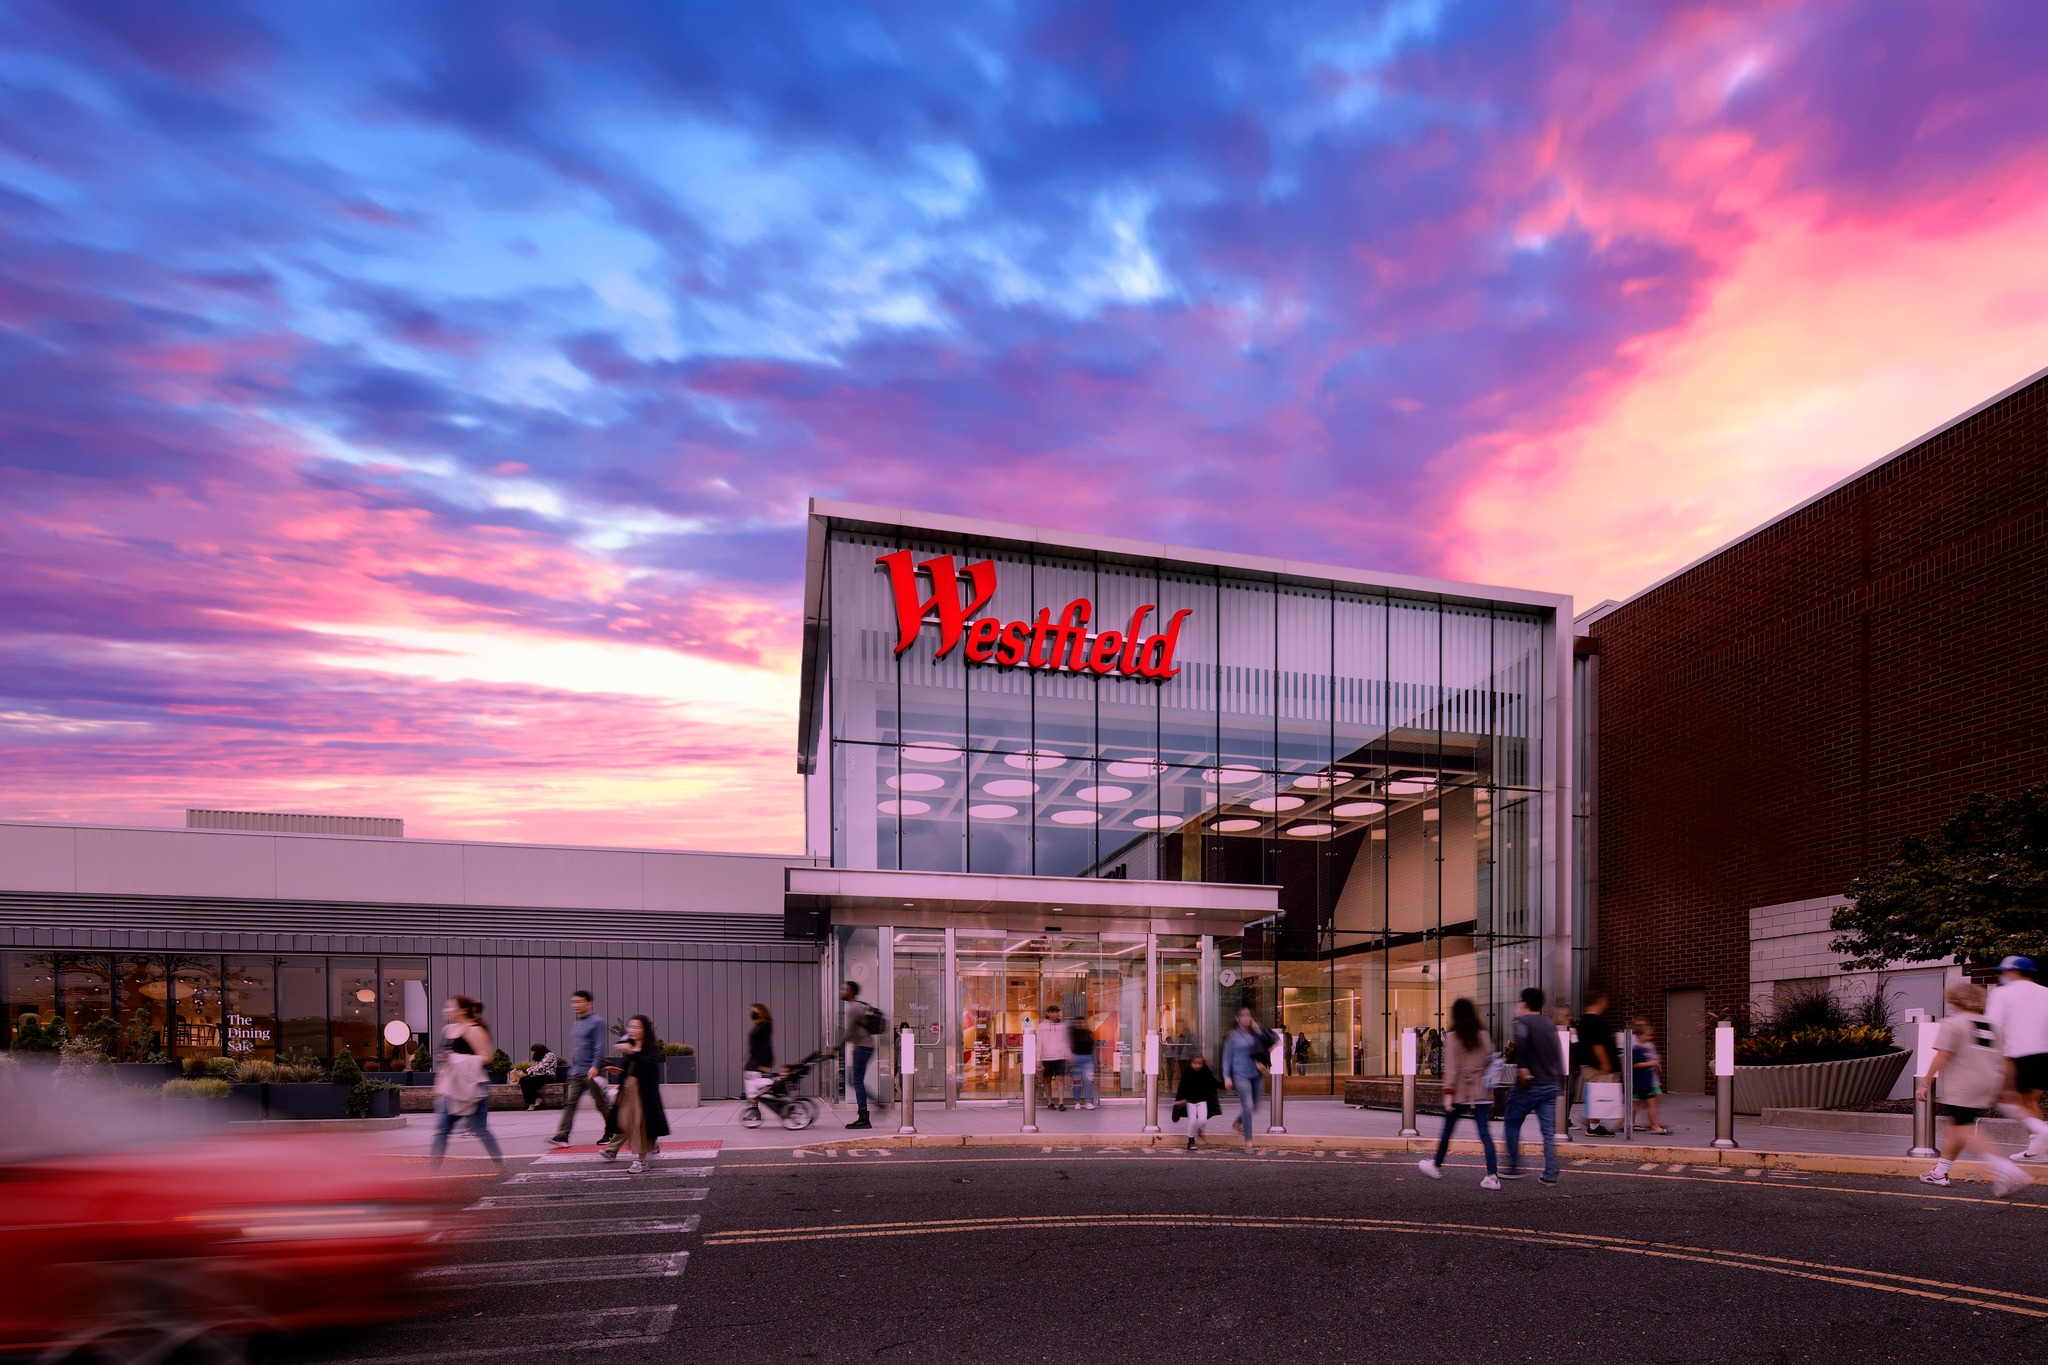 WESTFIELD GARDEN STATE PLAZA MALL ANNOUNCES NEW CHAPERONE POLICY